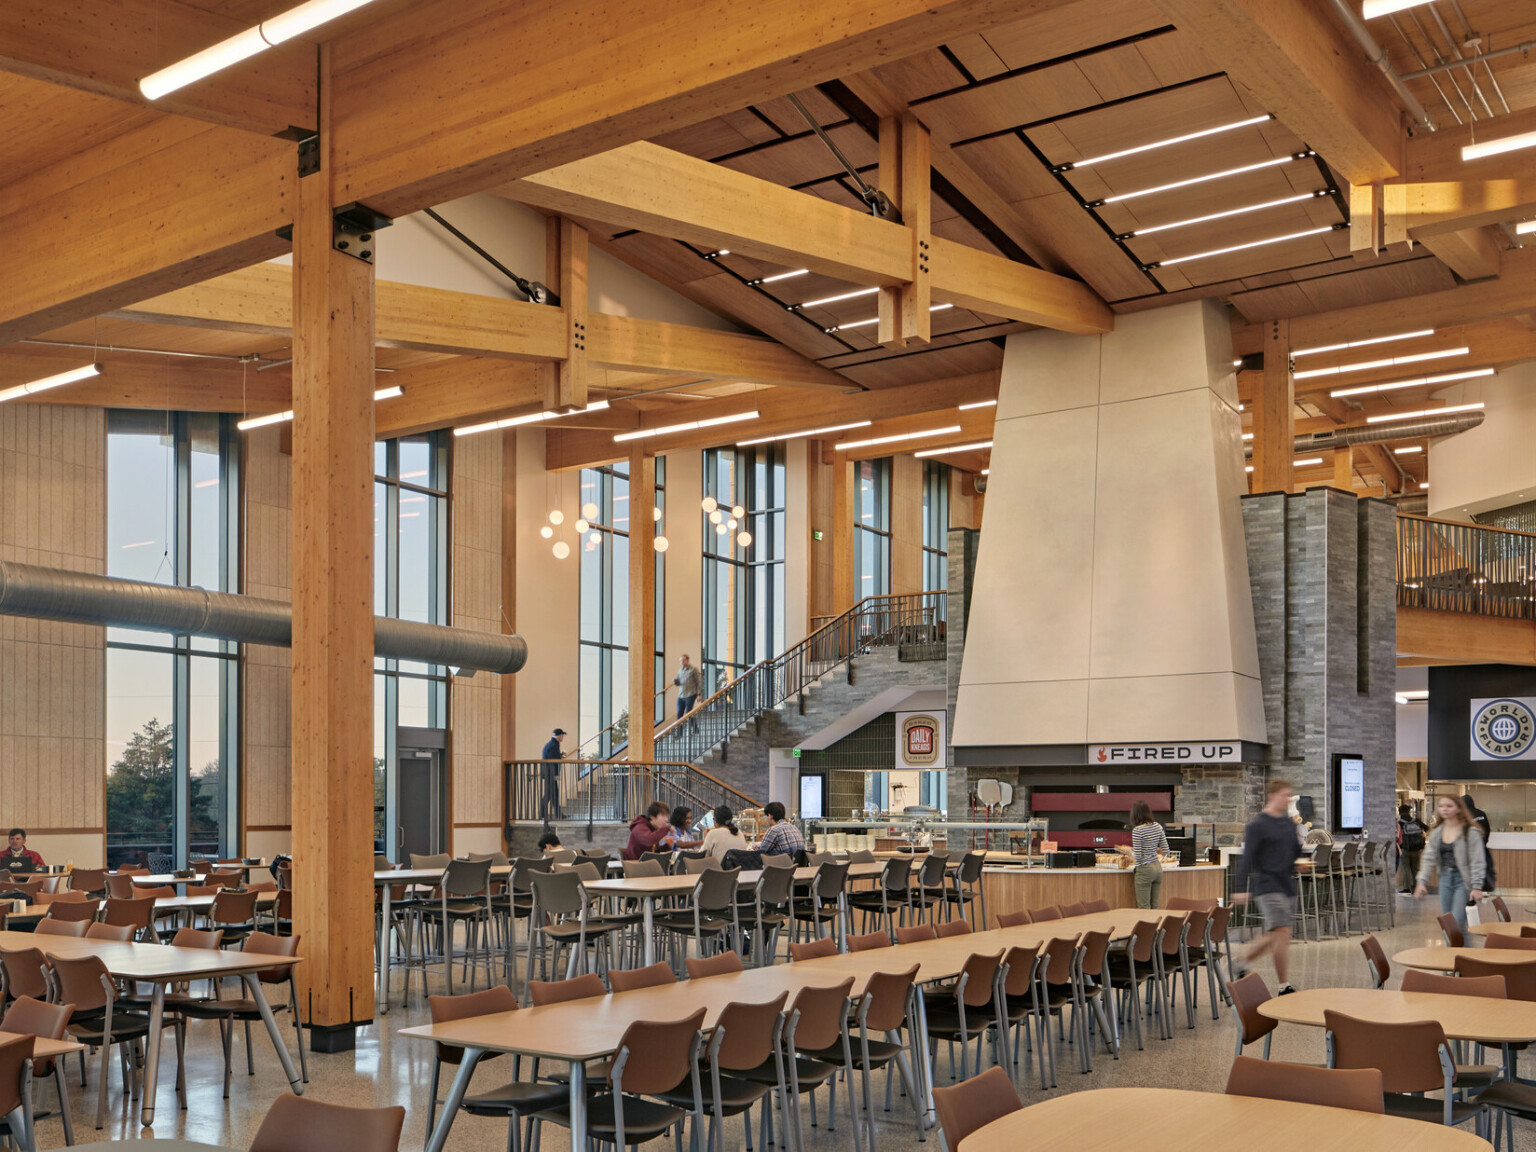 large two-story glass dining hall with exposed timber beams and posts, stone wrapped stair leading to second floor seating area